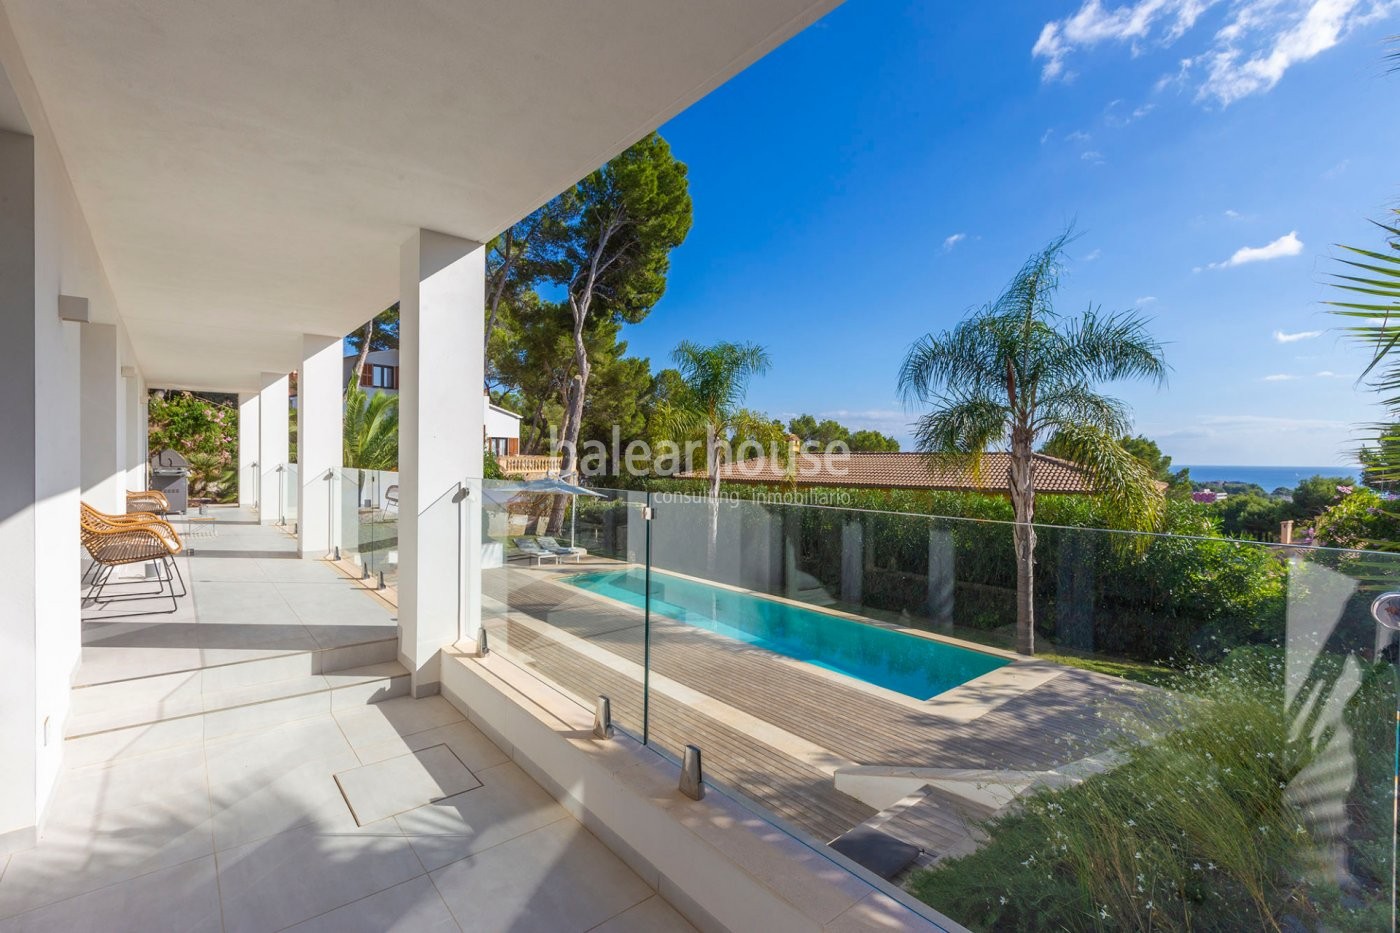 Excellent refurbishment of this villa in Costa d'en Blanes with swimming pool, garden and beautiful